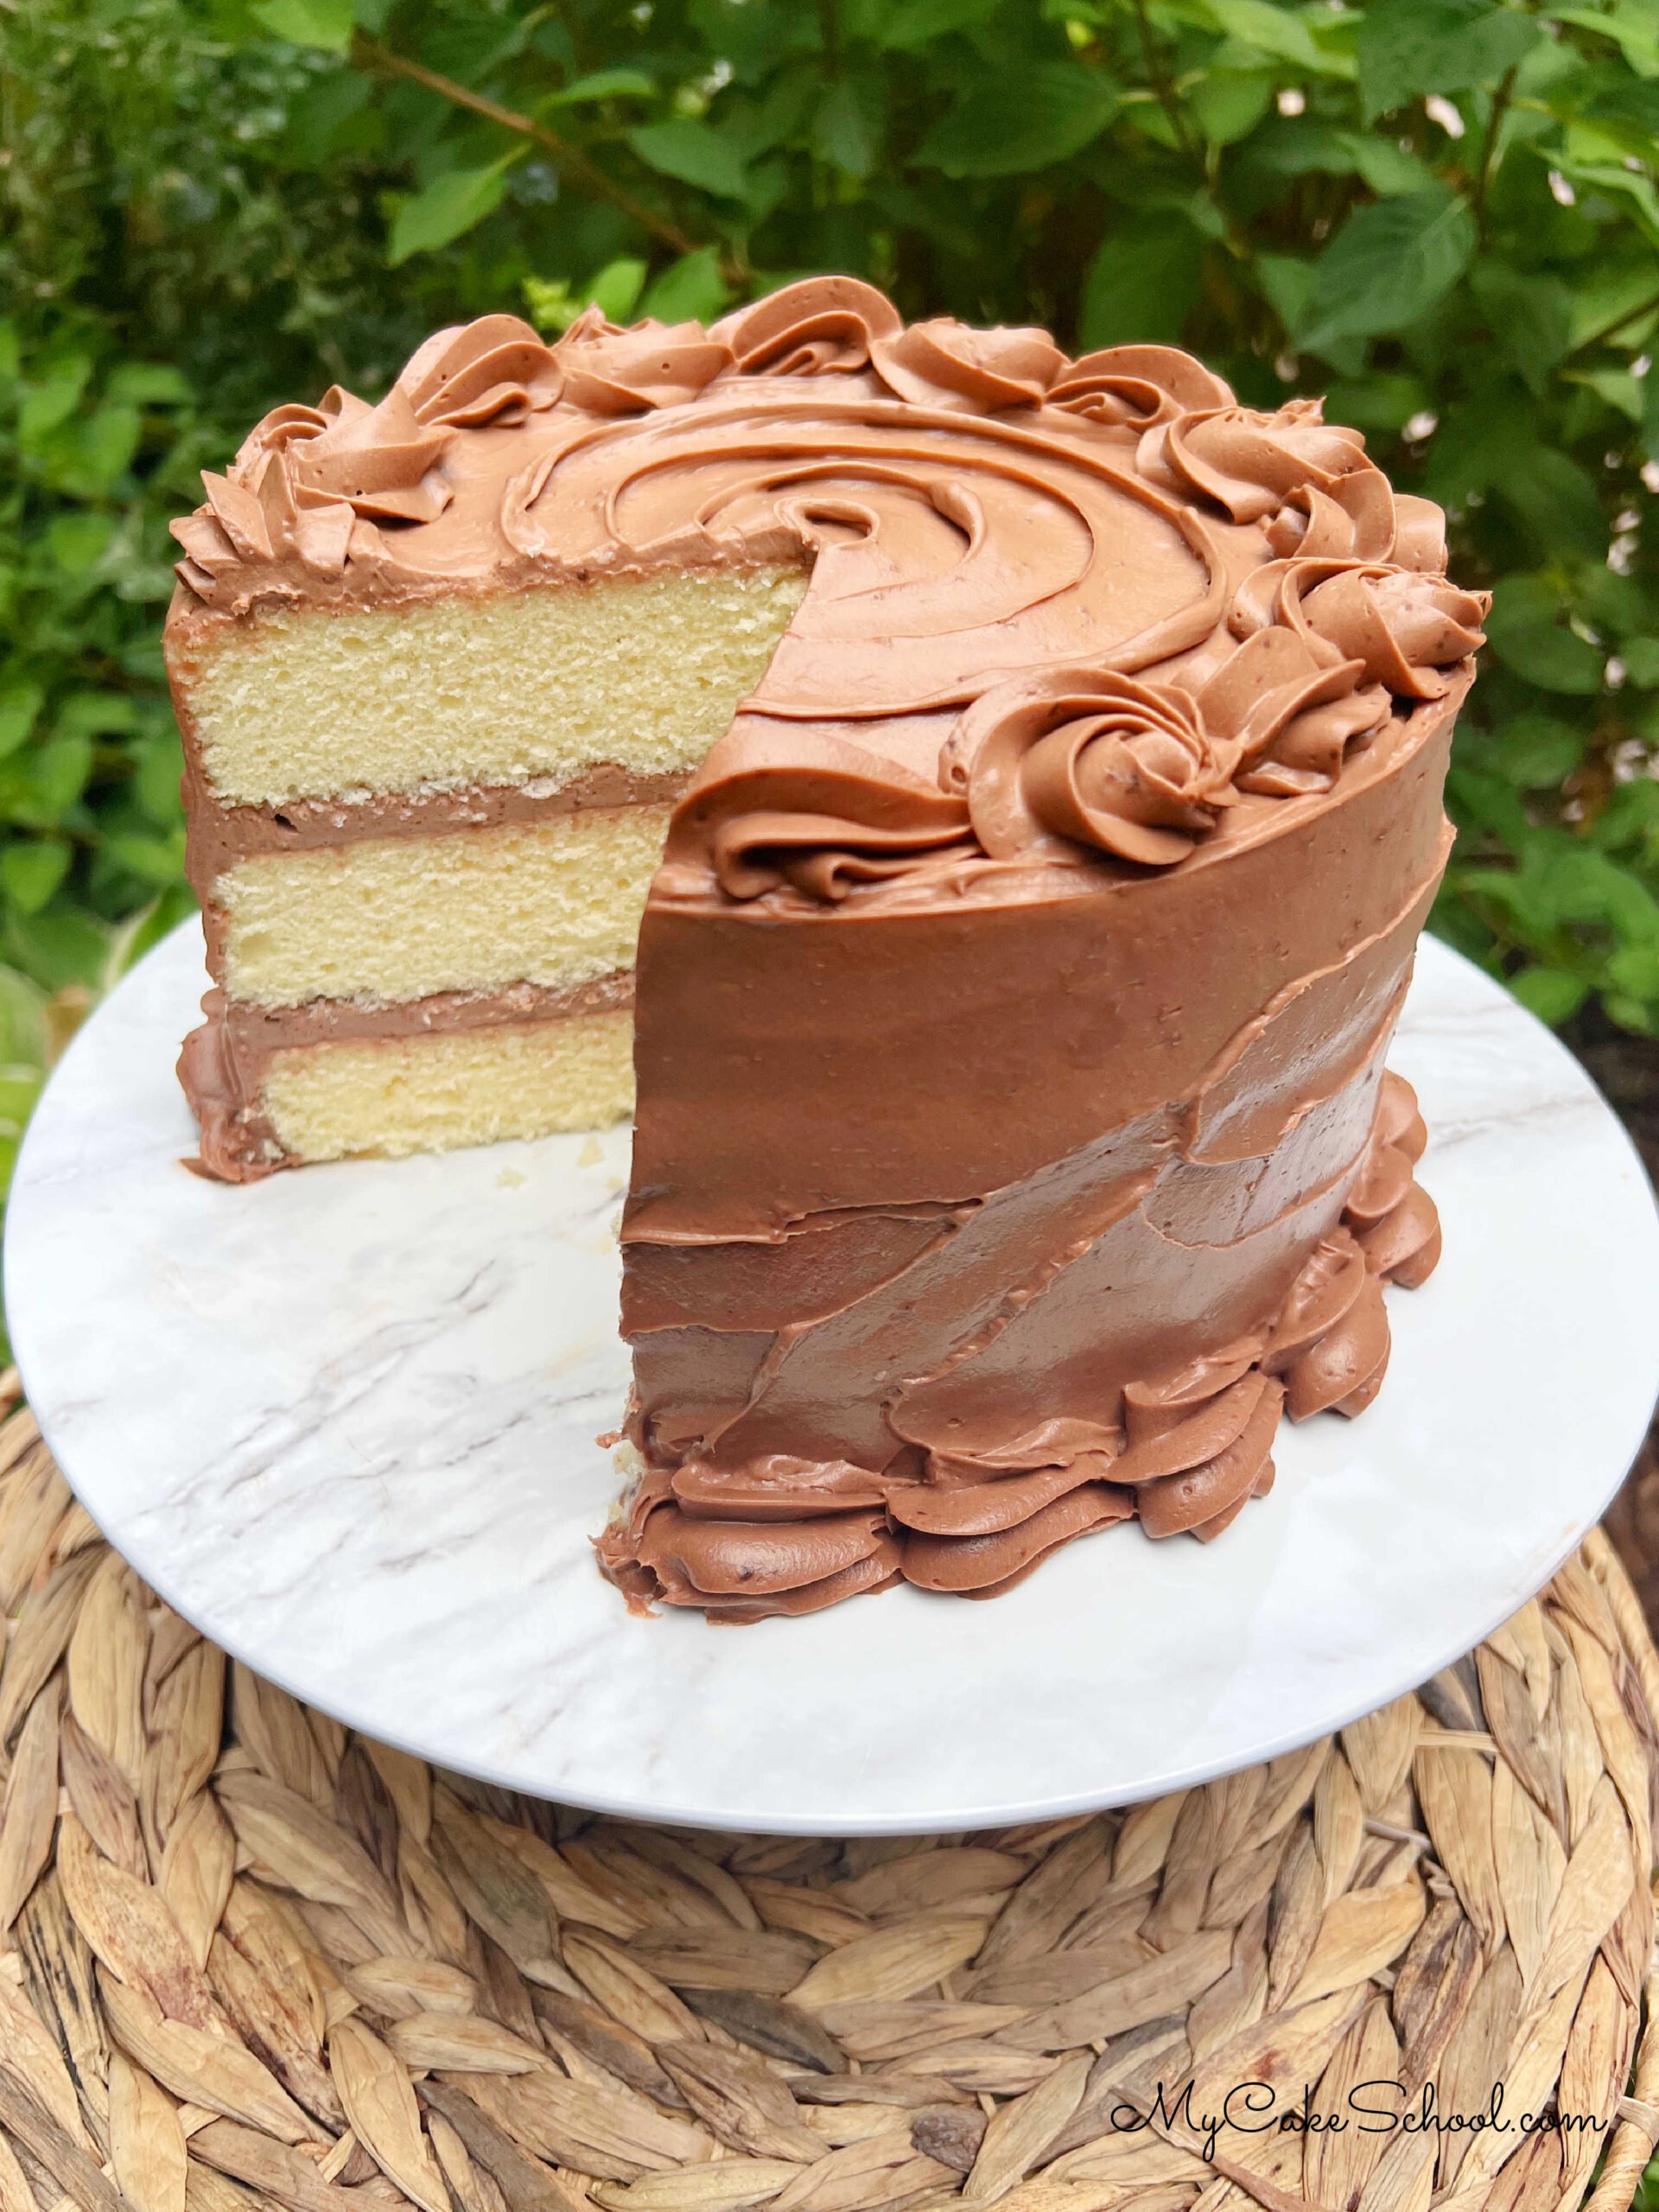 Sliced Yellow Velvet Cake with Chocolate Frosting on pedestal.